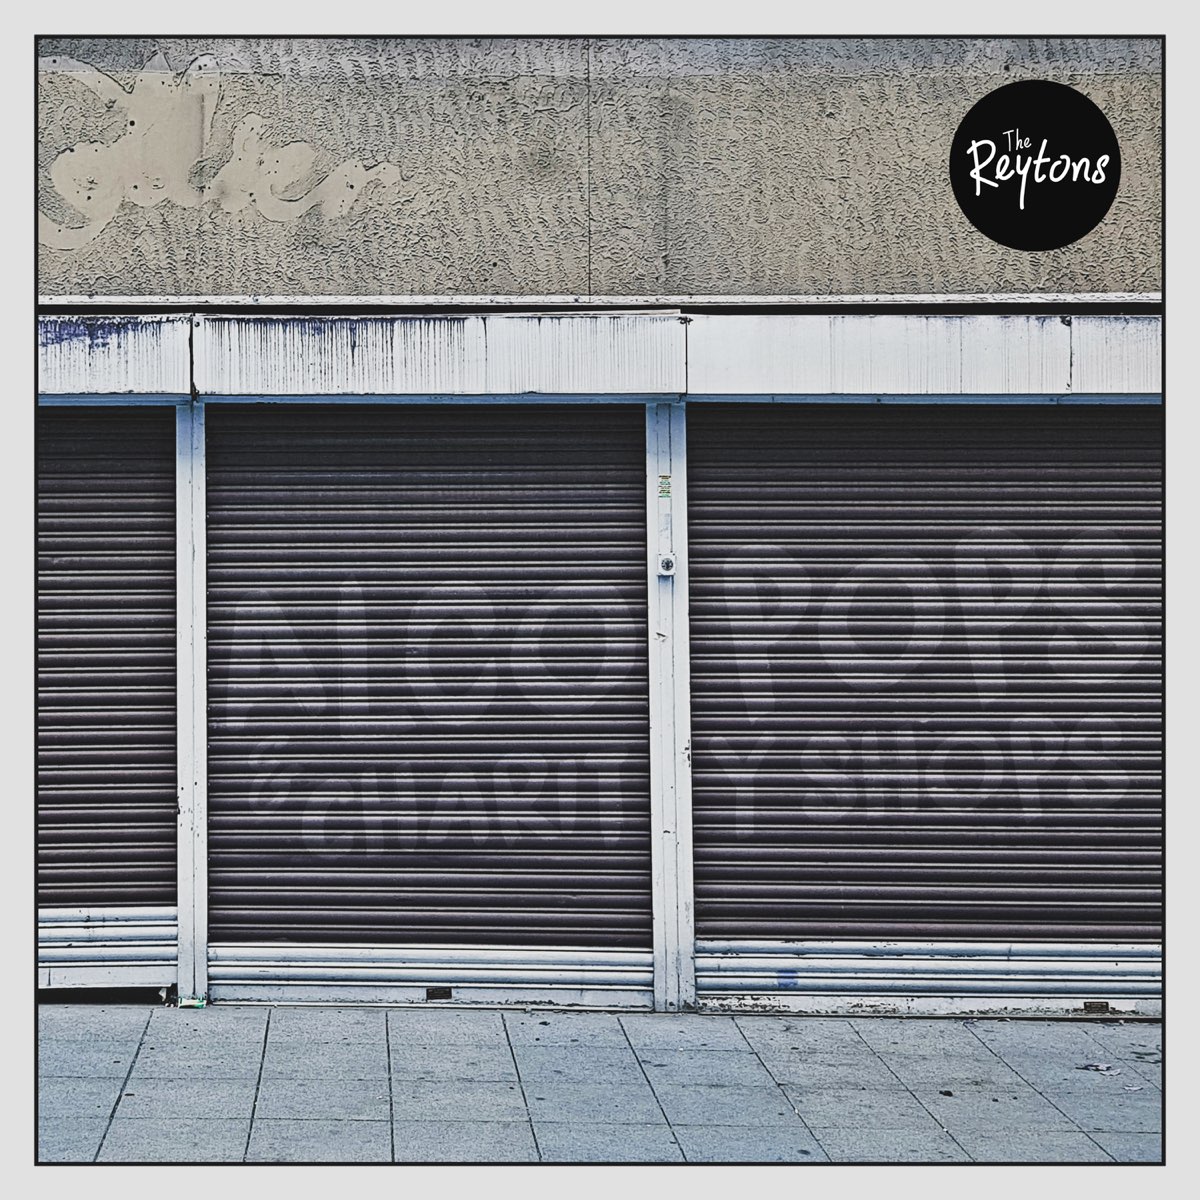 The Reytons Alcopops &amp; Charity Shops (EP) cover artwork